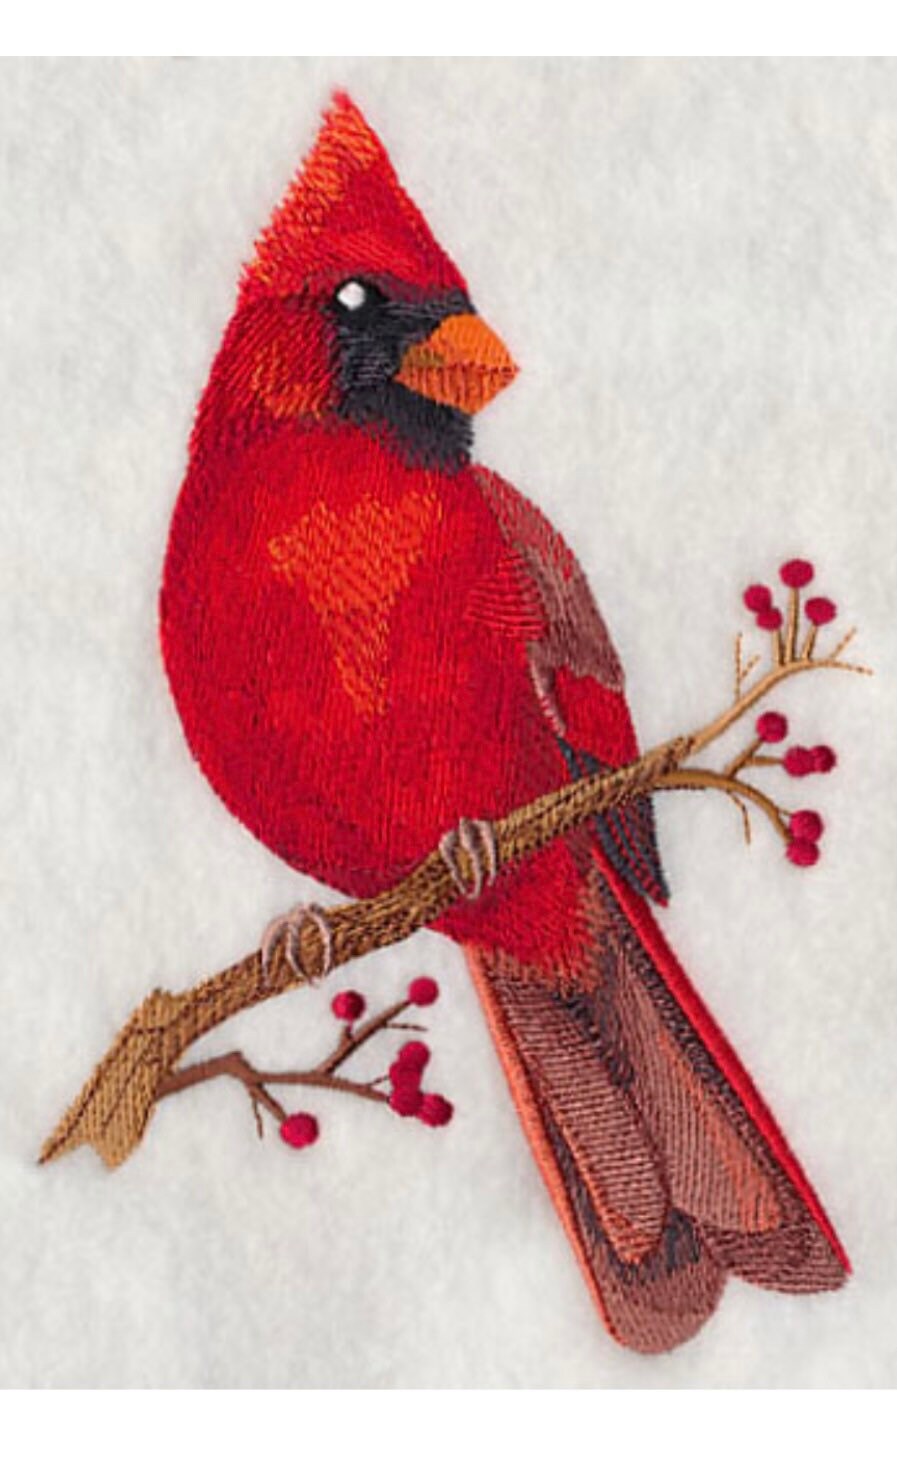 Embroidered Cardinal on Hand Towel. Beautifully Detailed Red Cardinal on Plush Cotton Hand Towel